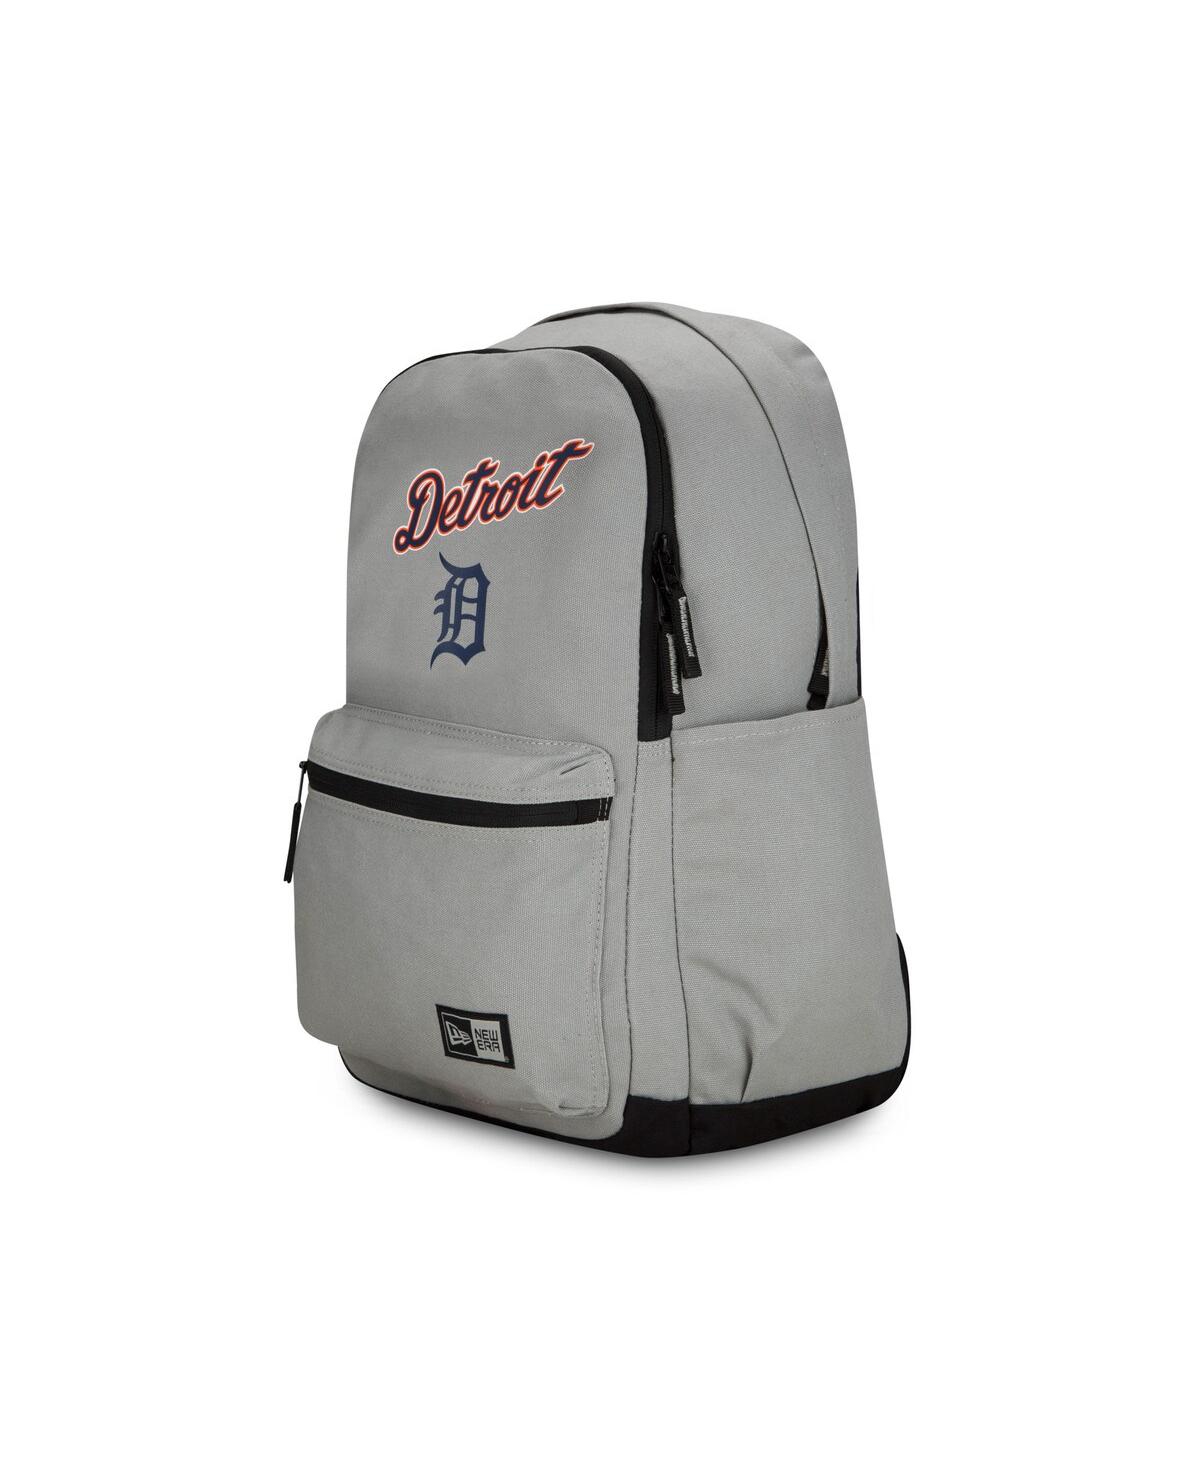 Men's and Women's New Era Detroit Tigers Throwback Backpack - Gray